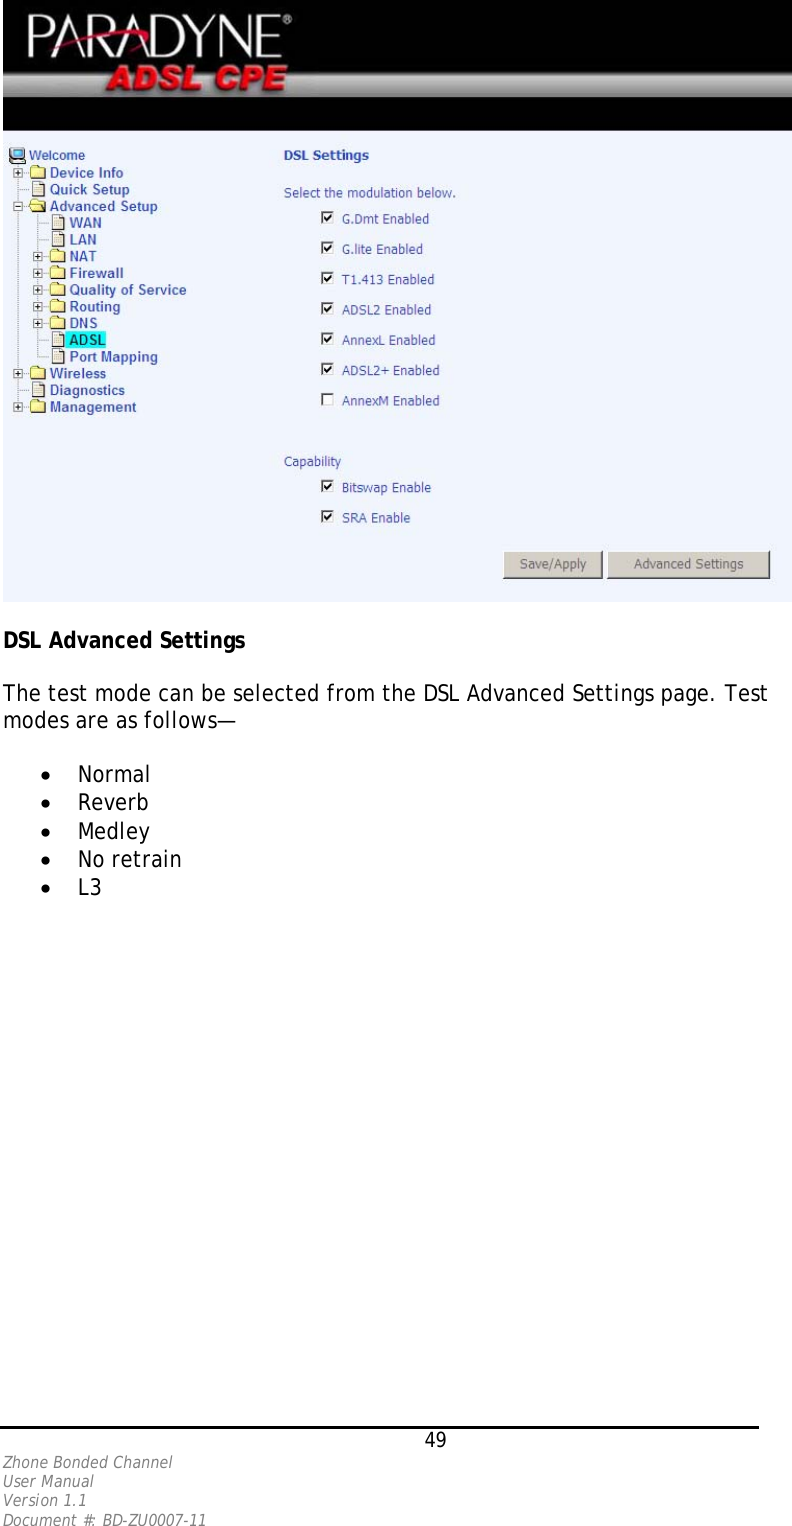   DSL Advanced Settings  The test mode can be selected from the DSL Advanced Settings page. Test modes are as follows—  •  Normal •  Reverb •  Medley •  No retrain •  L3    49 Zhone Bonded Channel User Manual  Version 1.1 Document #: BD-ZU0007-11 